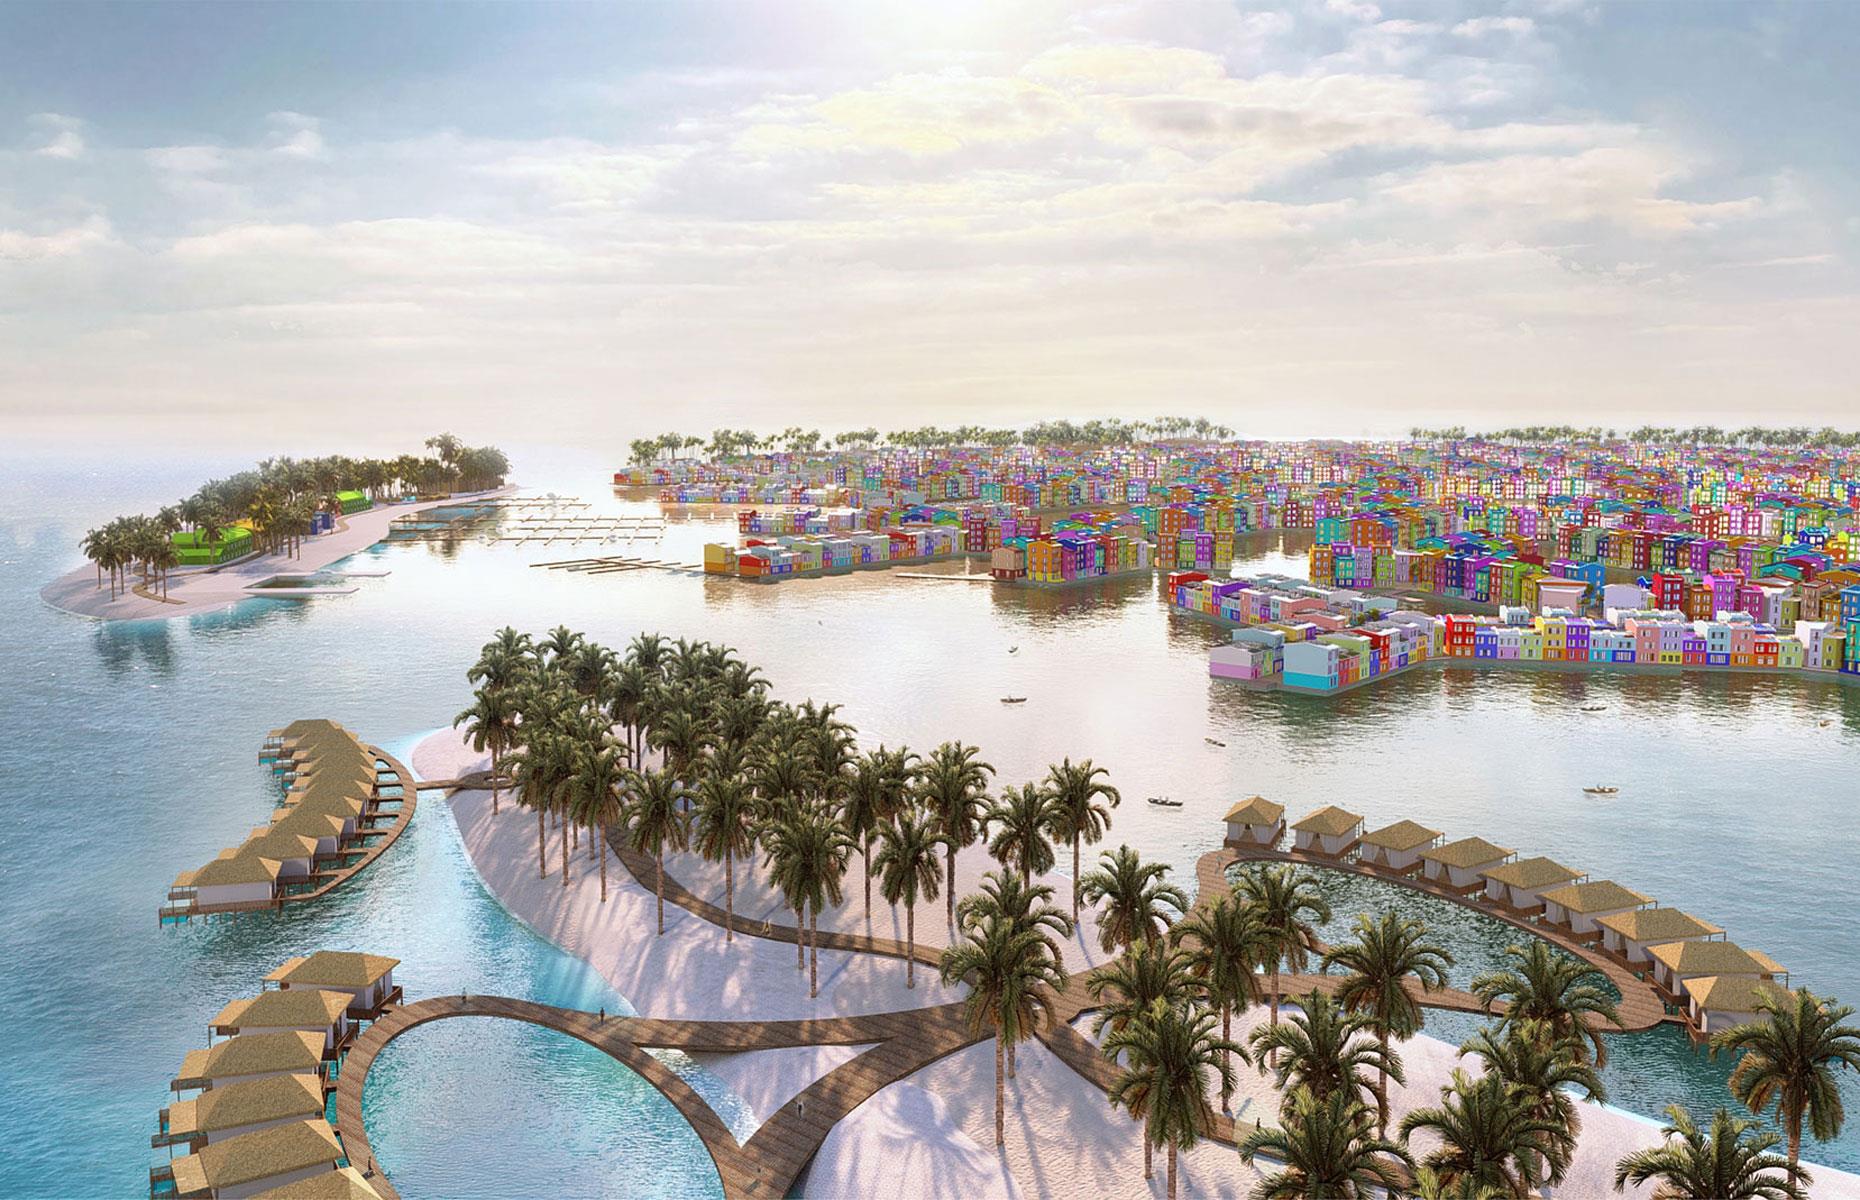 <p>A billion-dollar joint venture between the Maldives government and developer <a href="https://www.dutchdocklands.com/what-we-do/portfolio/maldives-floating-city/">Dutch Docklands</a>, with fellow Netherlands firm <a href="https://www.waterstudio.nl/projects/maldives-floating-city-a-benchmark-for-vibrant-communities-beyond-the-waterfront/">Waterstudio</a> taking care of design, <a href="https://maldivesfloatingcity.com/">Maldives Floating City</a> will comprise 5,000 floating units tethered to the floor of a 500-acre lagoon. The brightly colored units will serve as homes, restaurants, hotels, retail stores, schools and other amenities catering to a population of up to 20,000 people.</p>